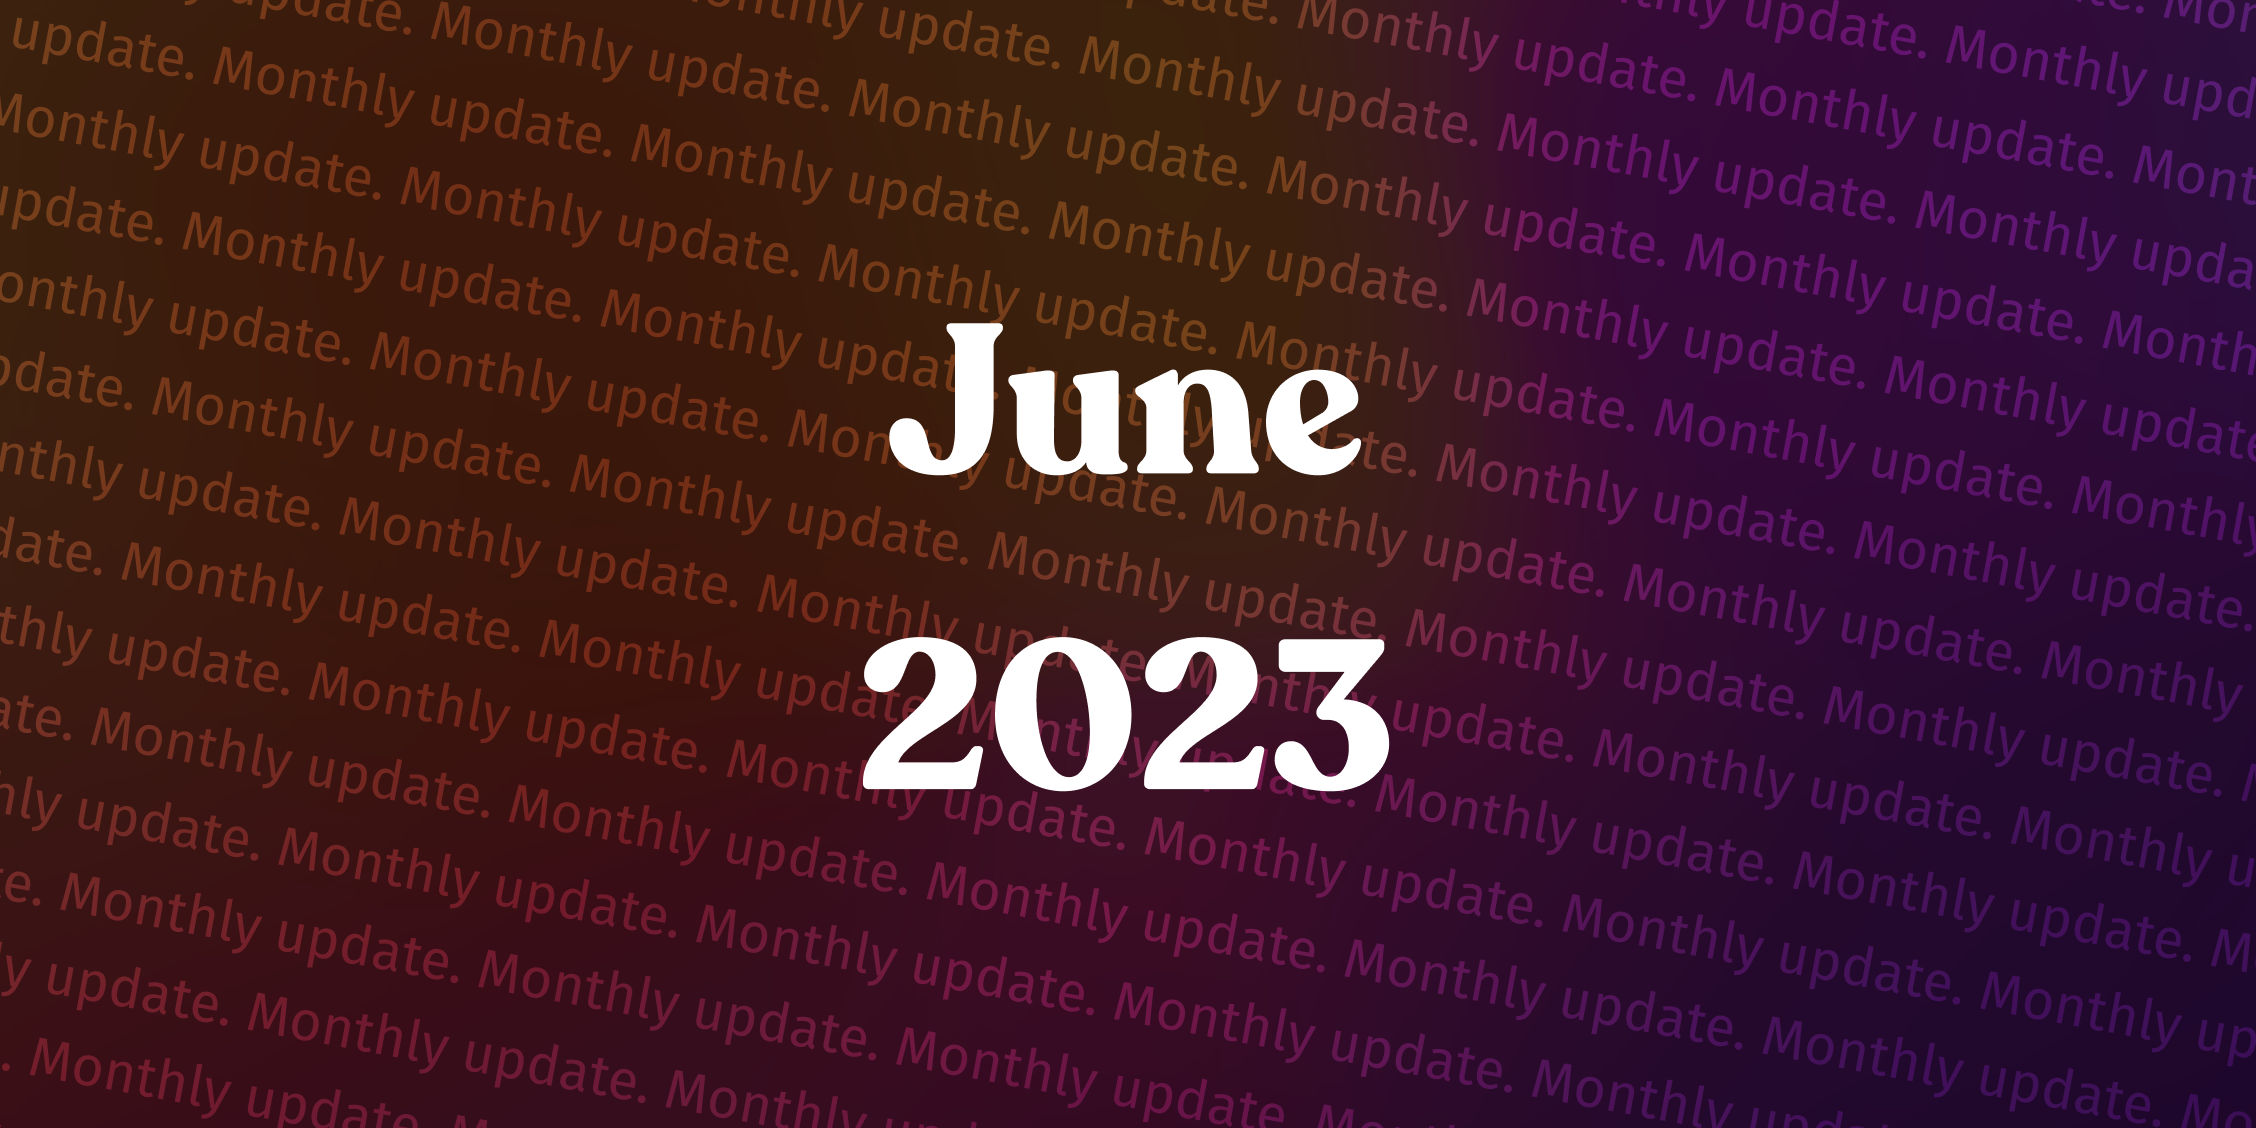 What’s new in Pausly, June 2023